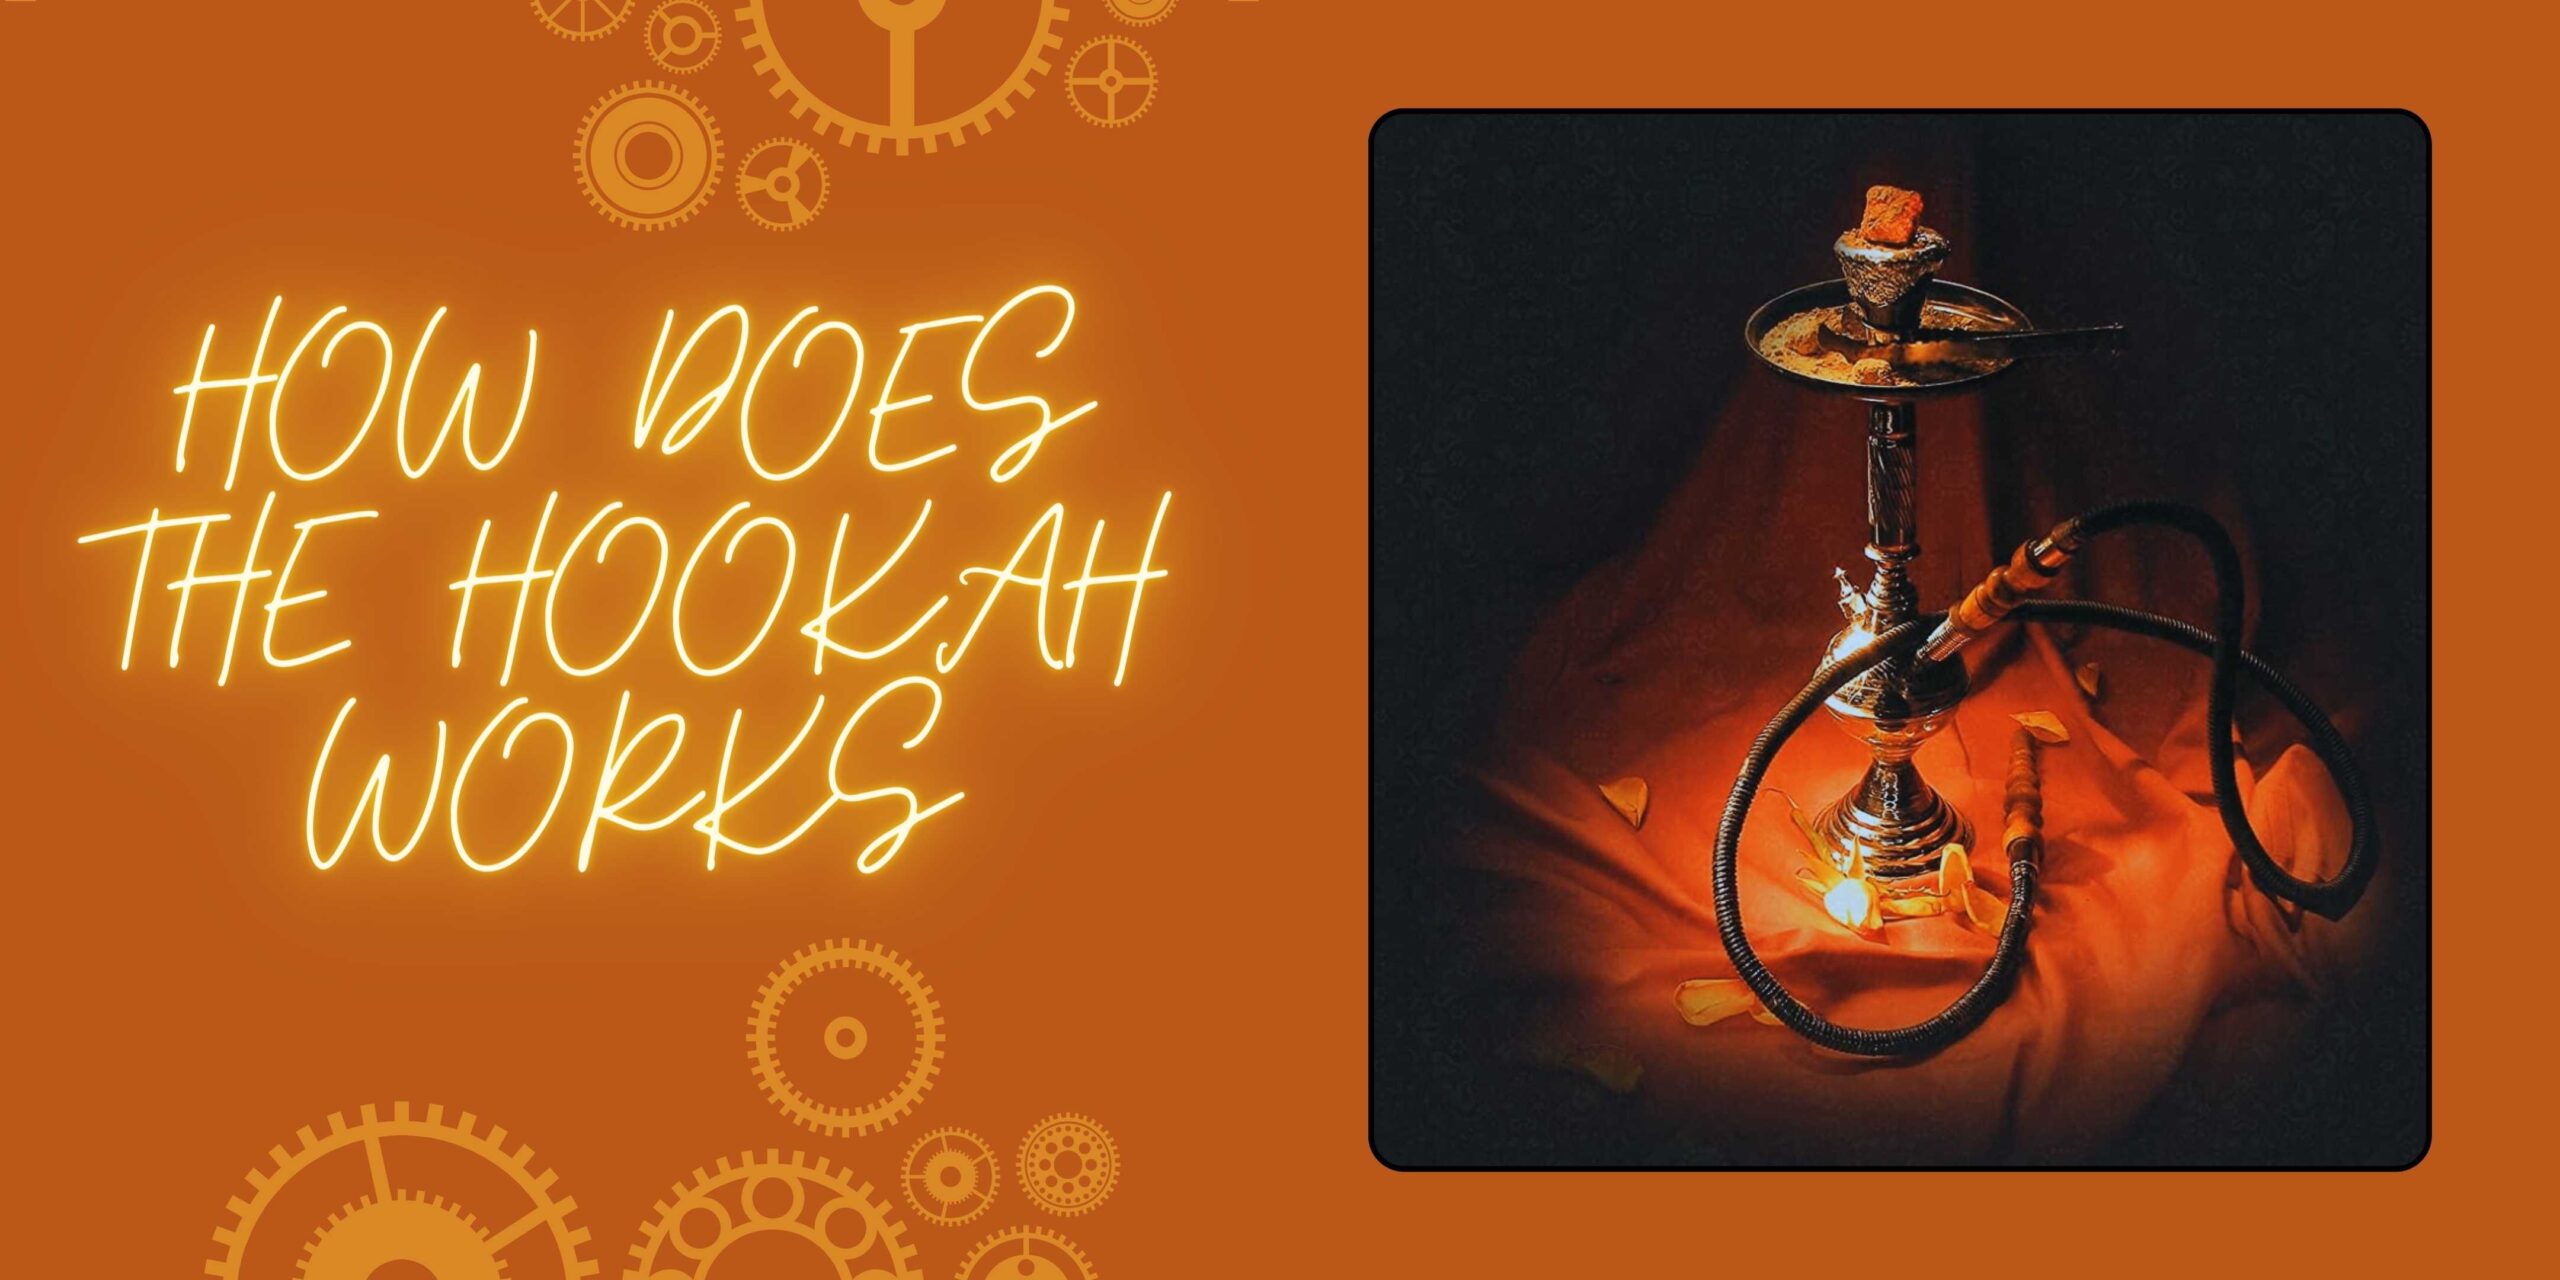 image giving showing a hookah on a side with some gears around and text written on it how does a hookah works